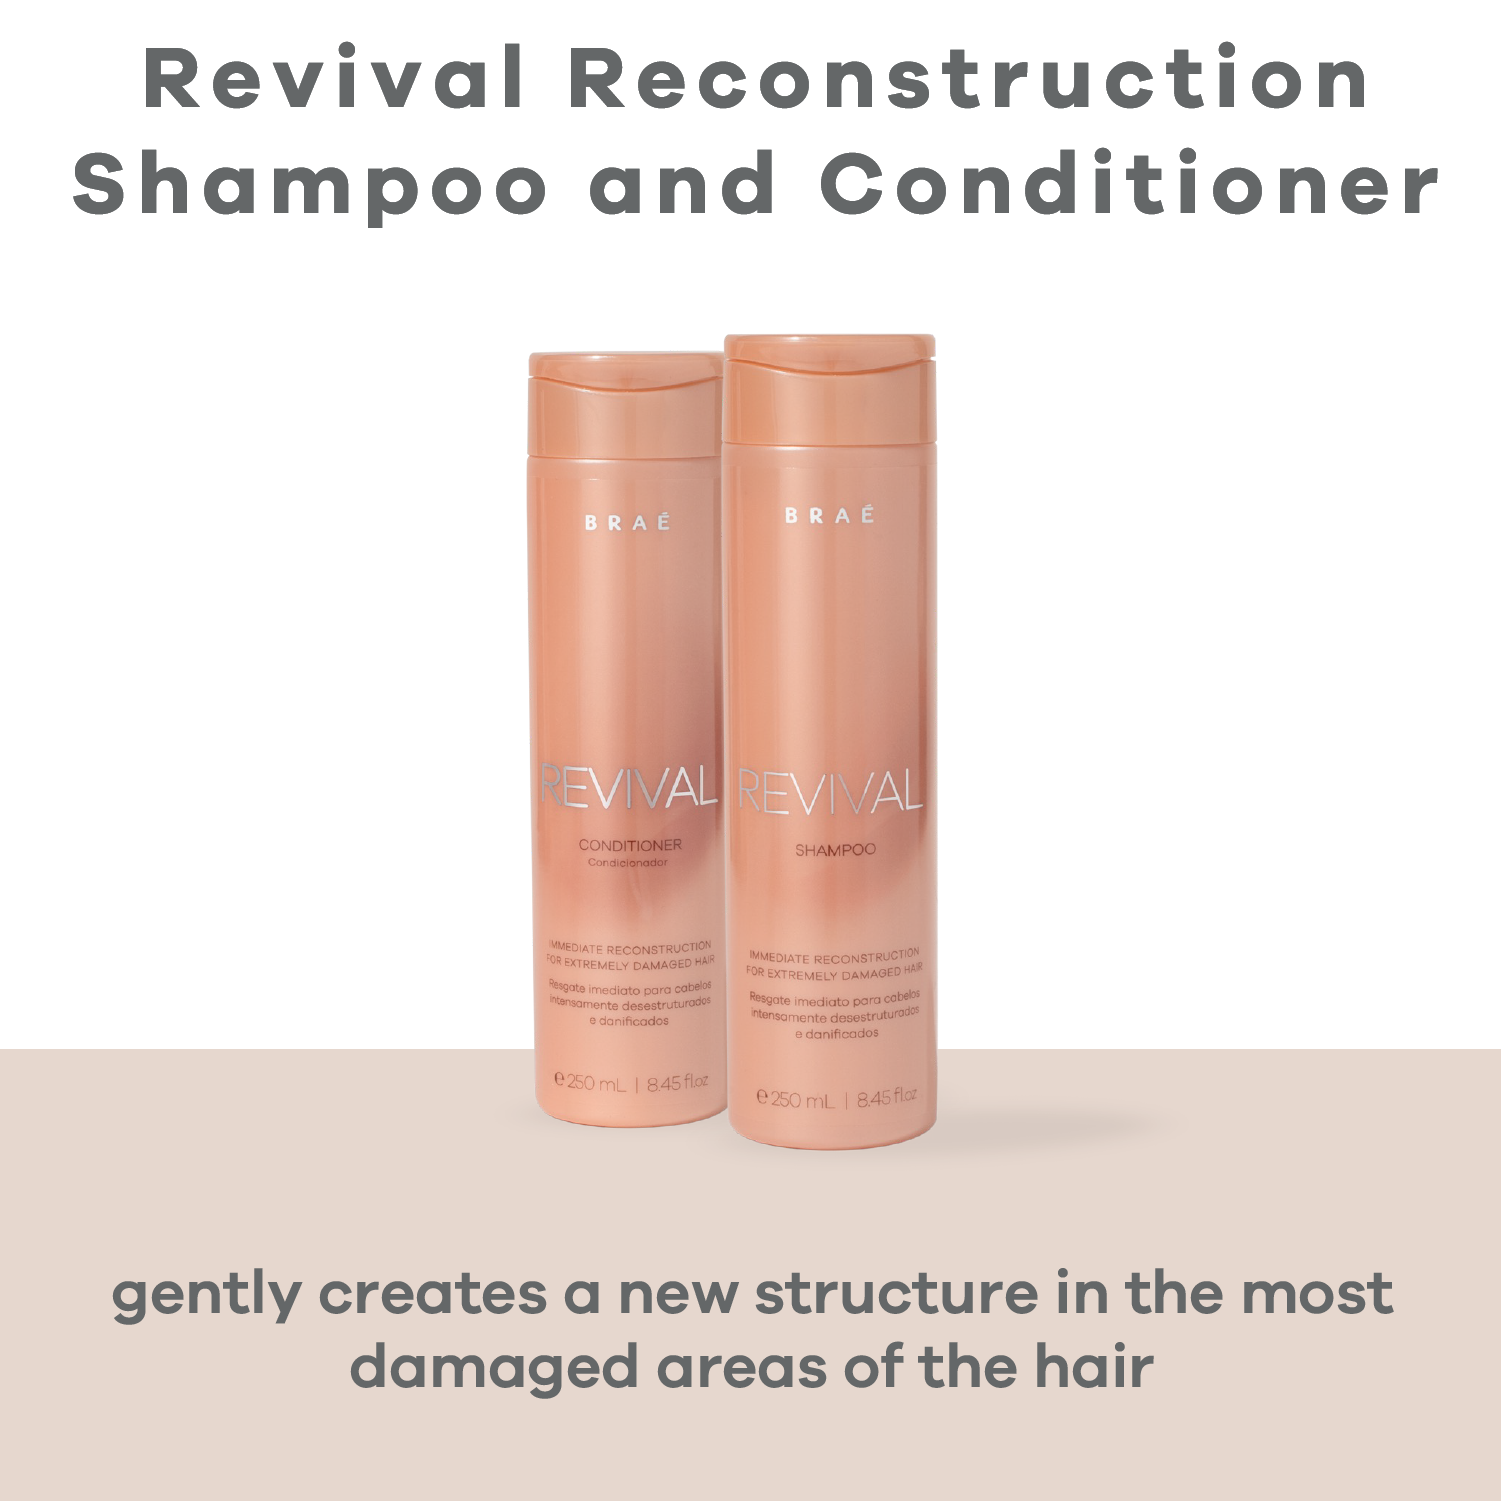 Revival total hair recovery set